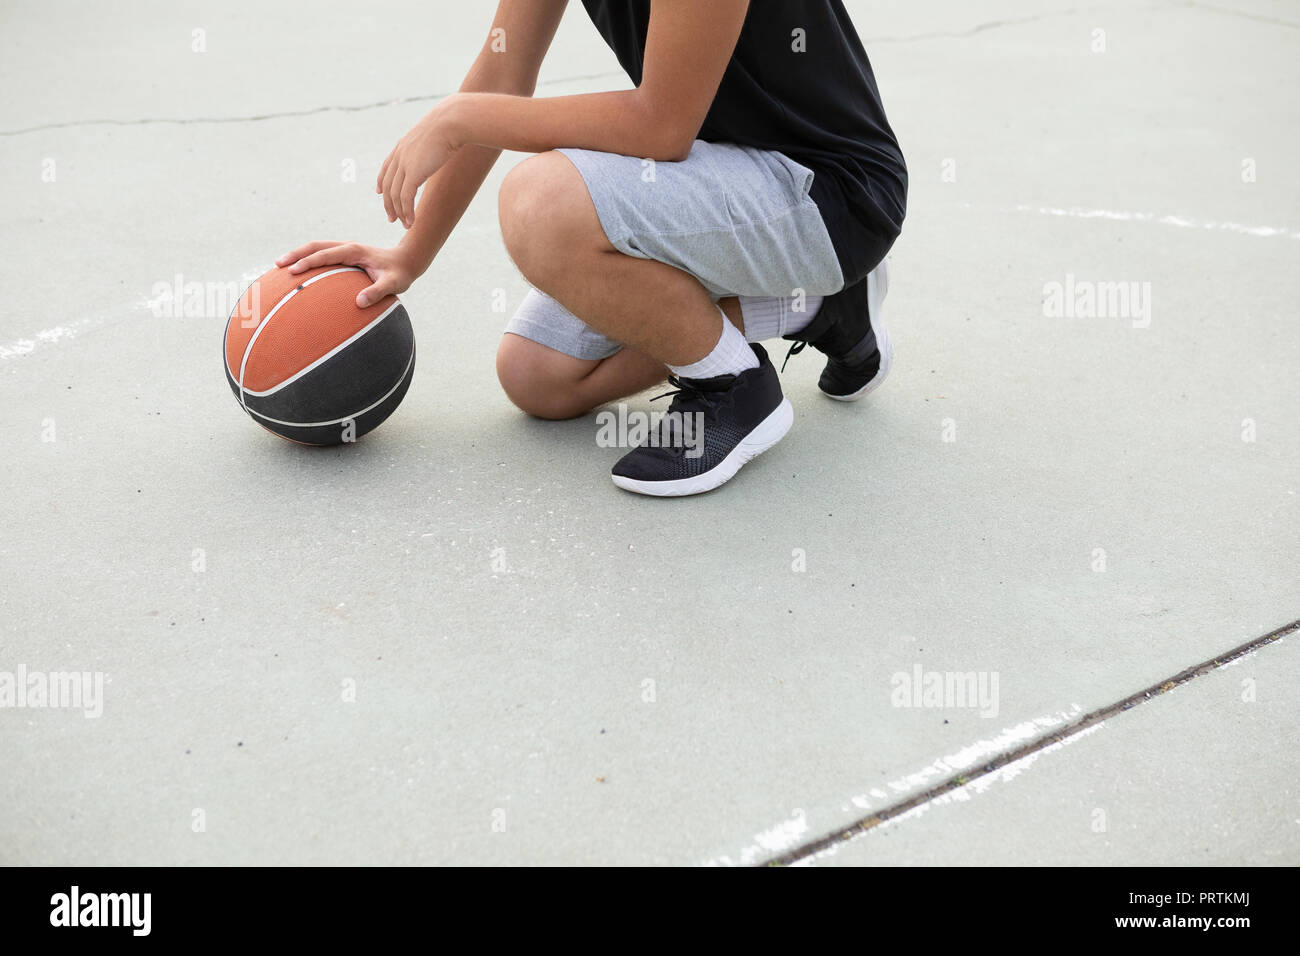 Male teenage basketball player crouching with ball on basketball court, neck down Stock Photo